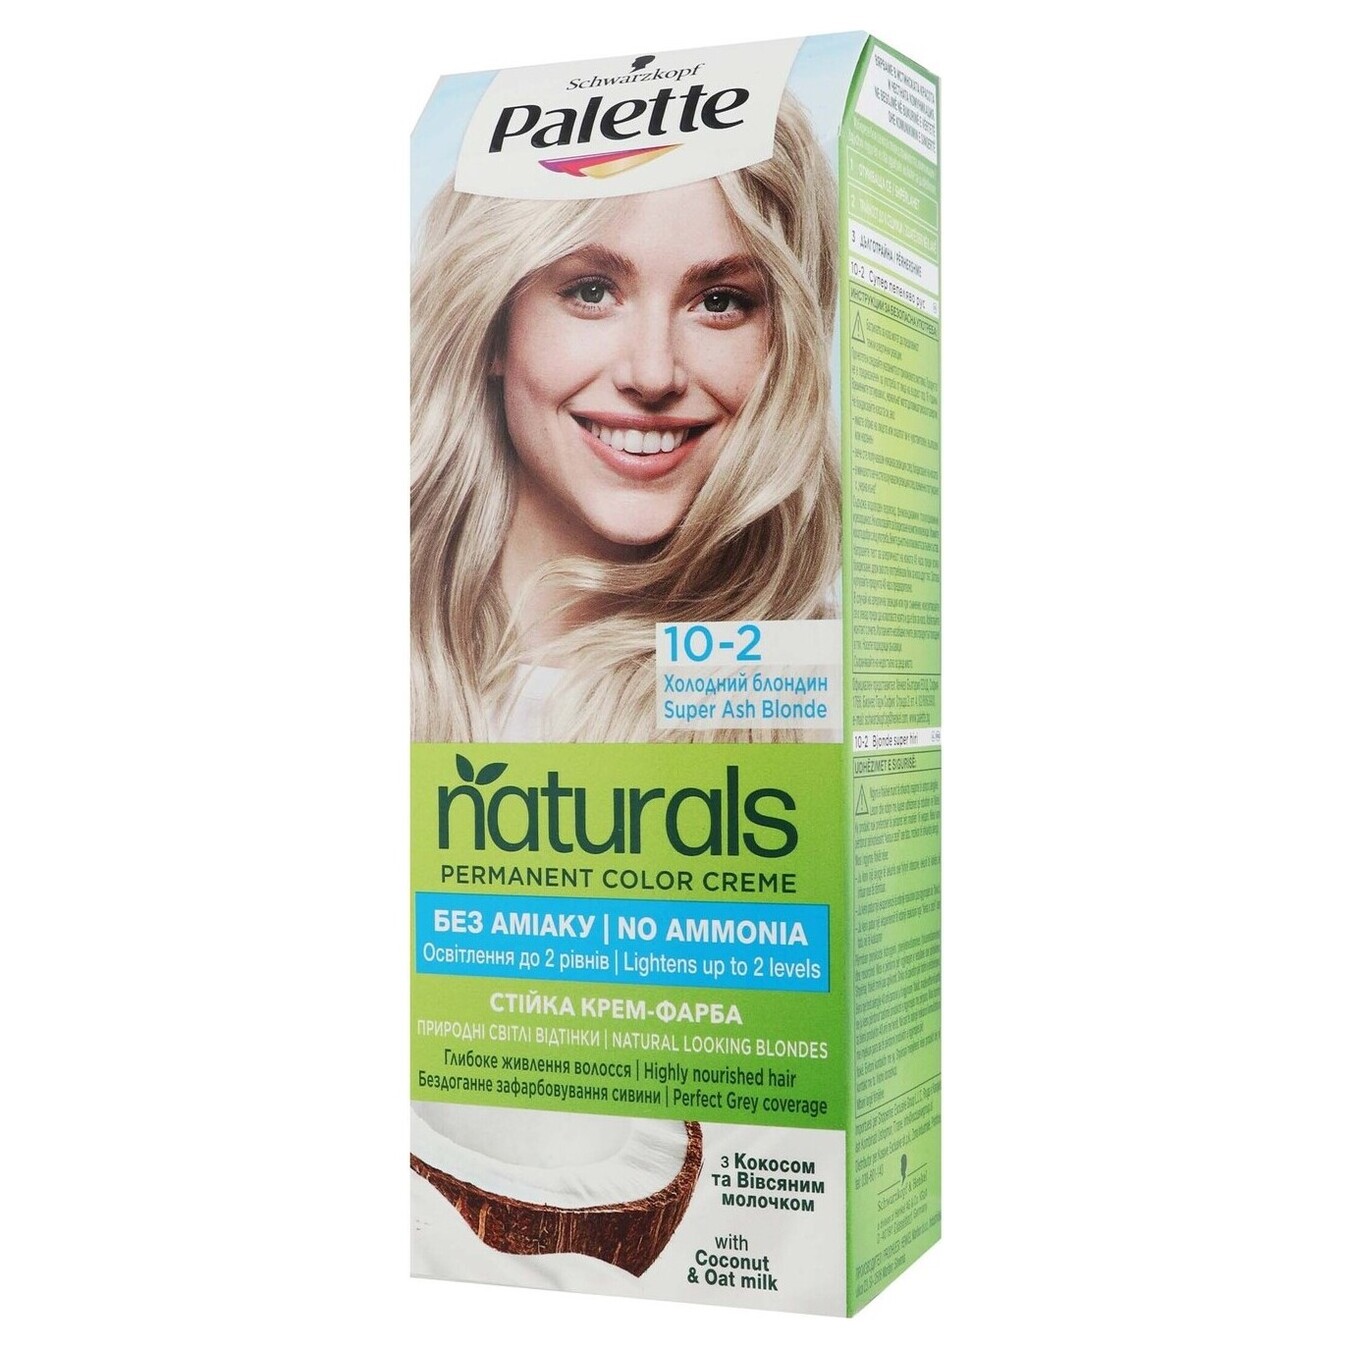 Cream-paint Palette Naturals 10-2 Cold blonde without ammonia for permanent hair 110ml 2